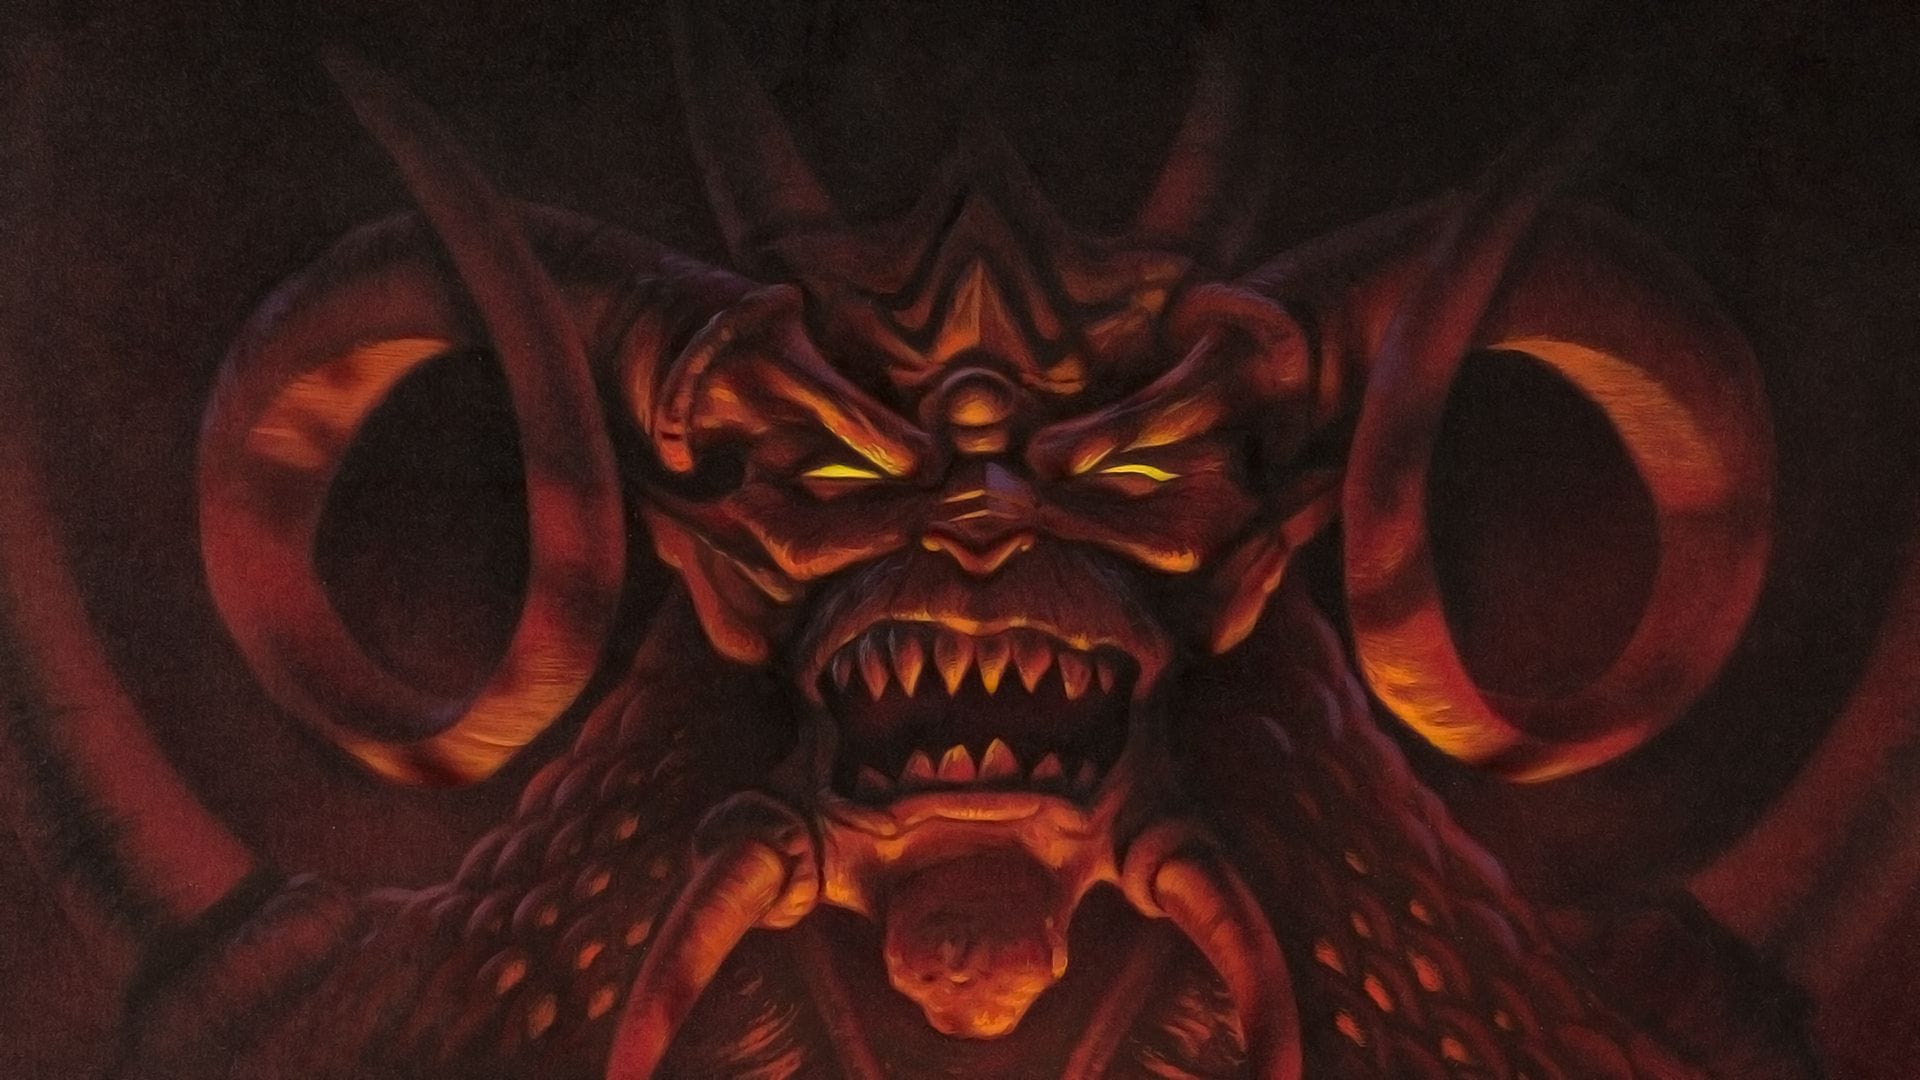 Face the Lord of Terror in Diablo, now available on Battle.net